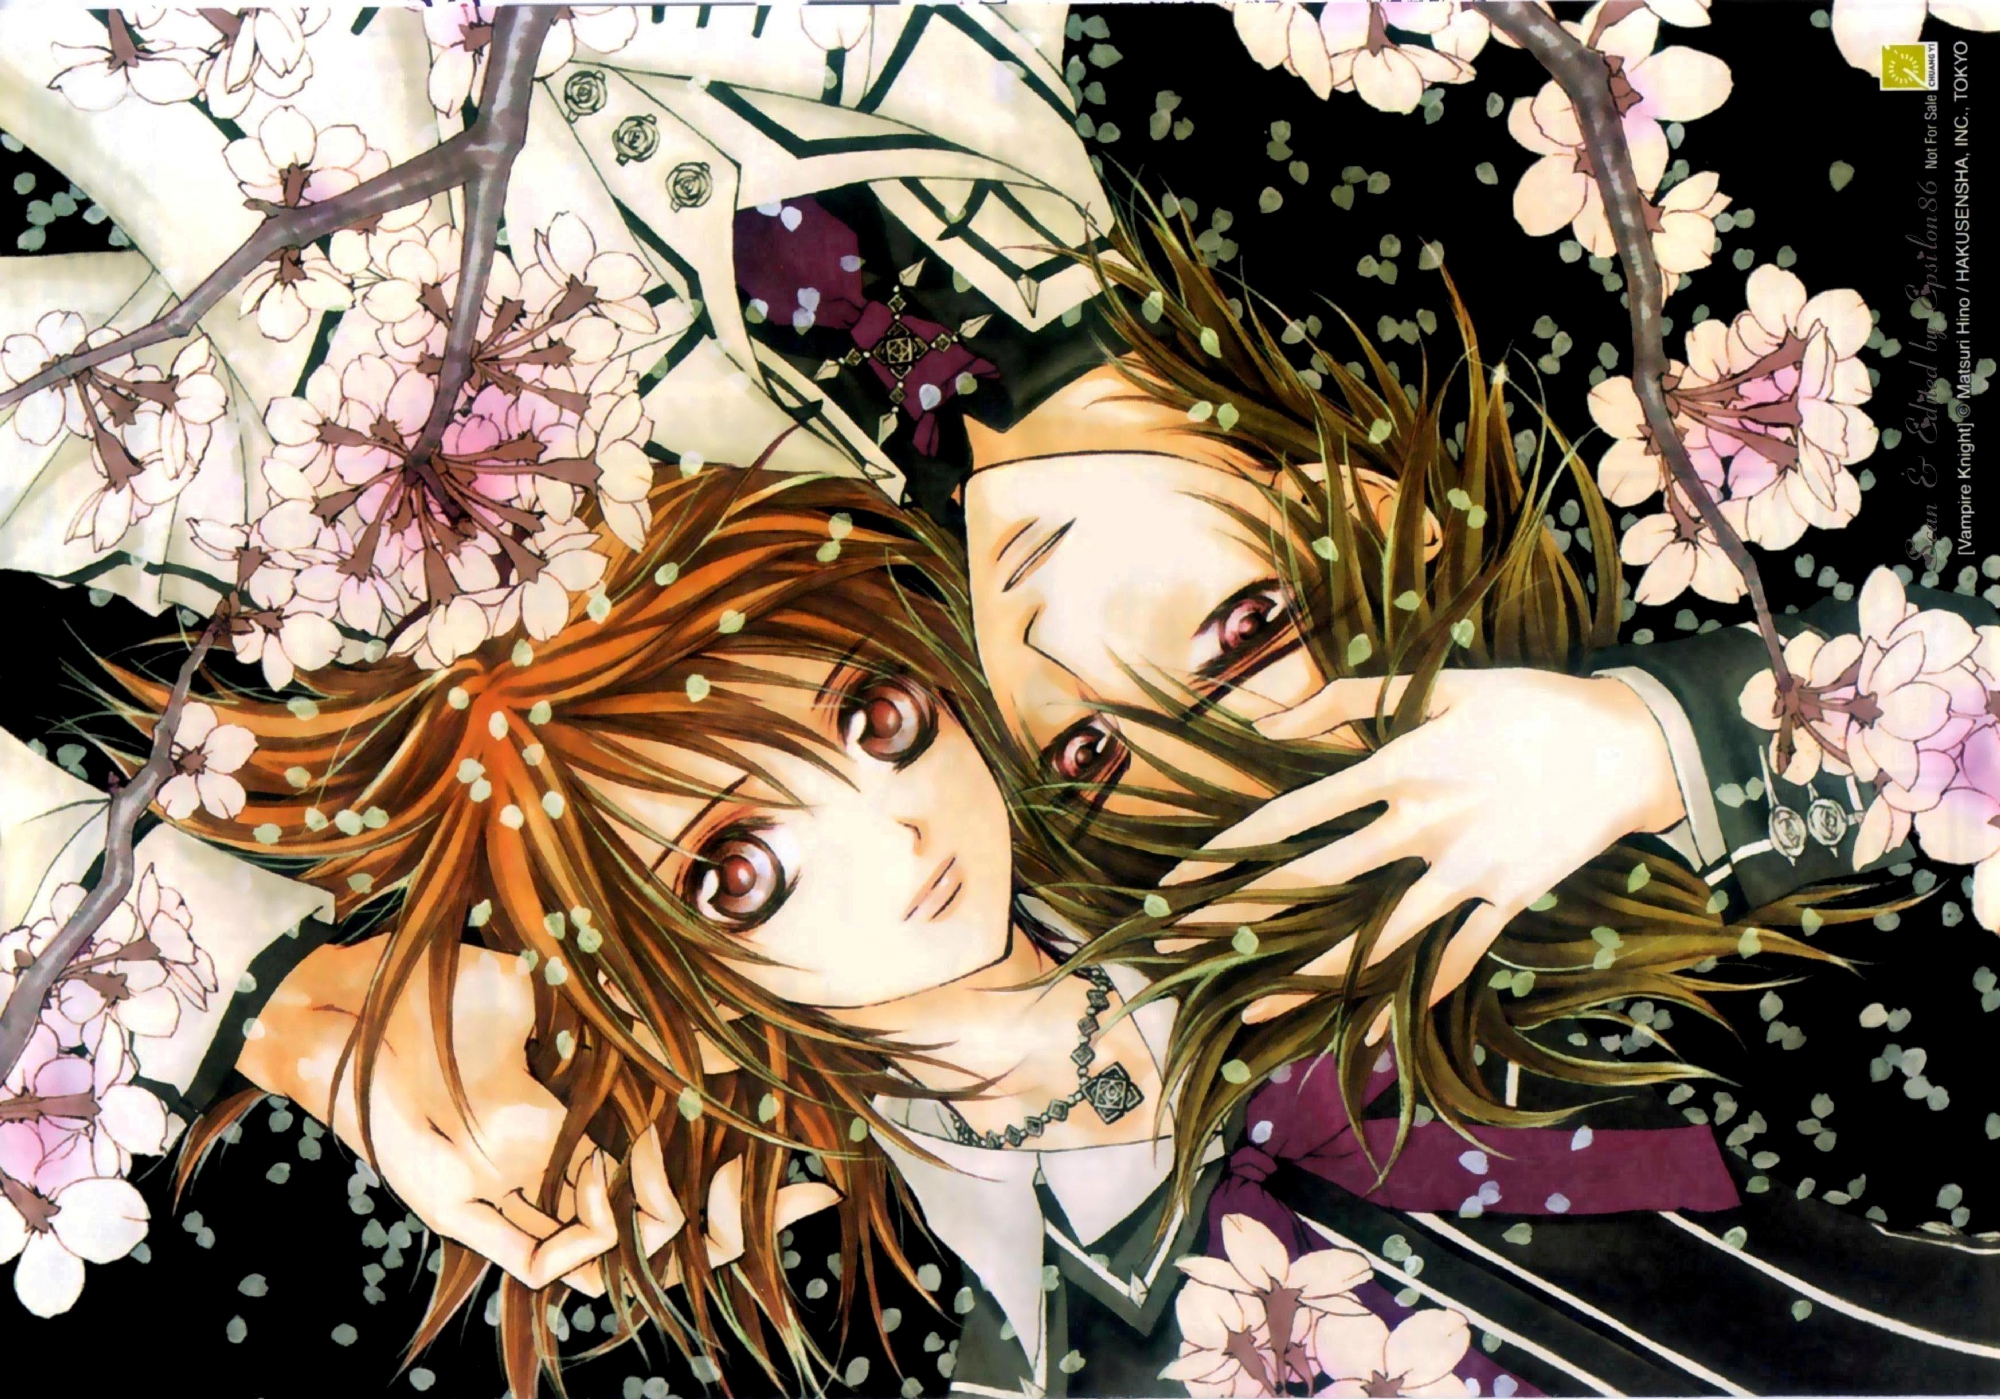 Kaname and Yuki from Vampire Knight in anime style.